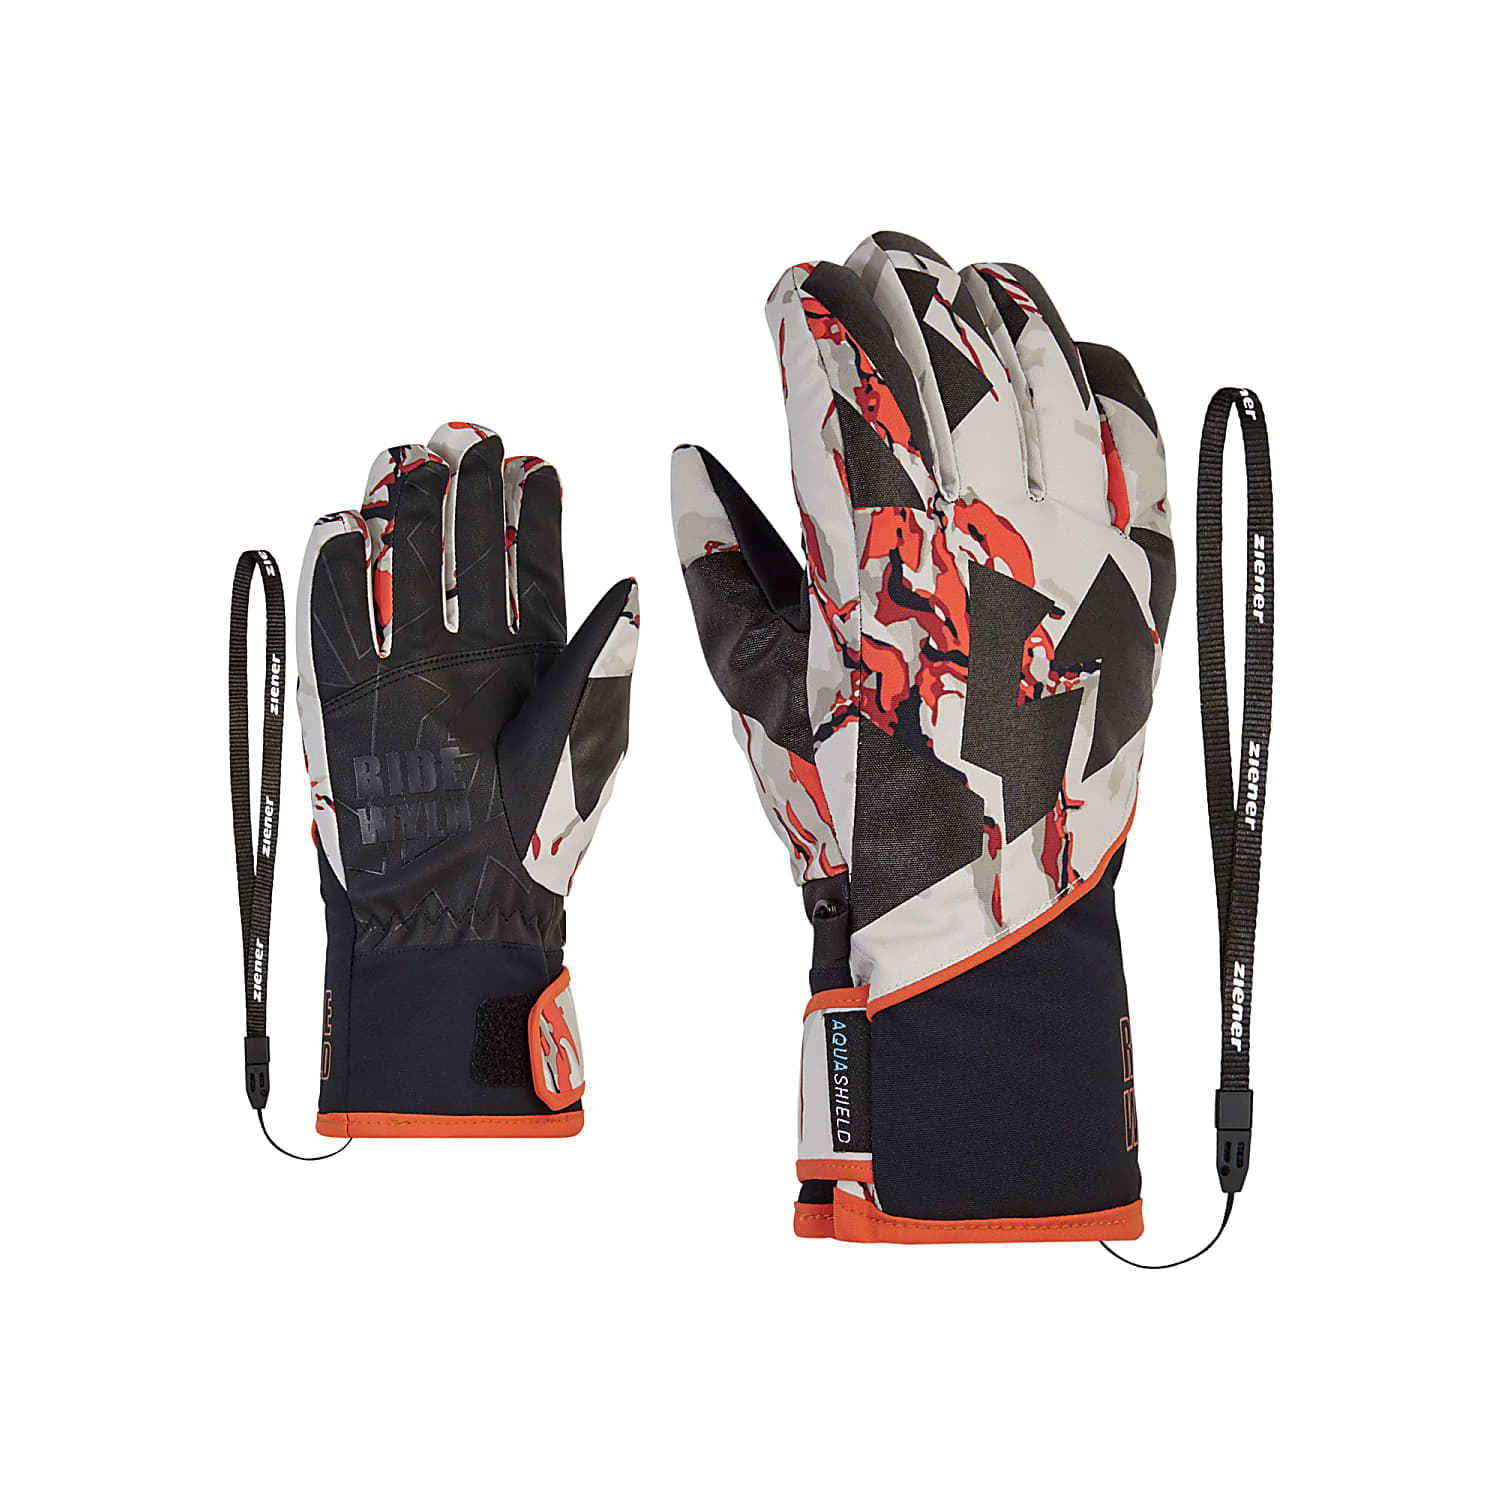 - Cliff AW cheap Print AS LIWO Fast GLOVE, and shipping JUNIOR Ziener